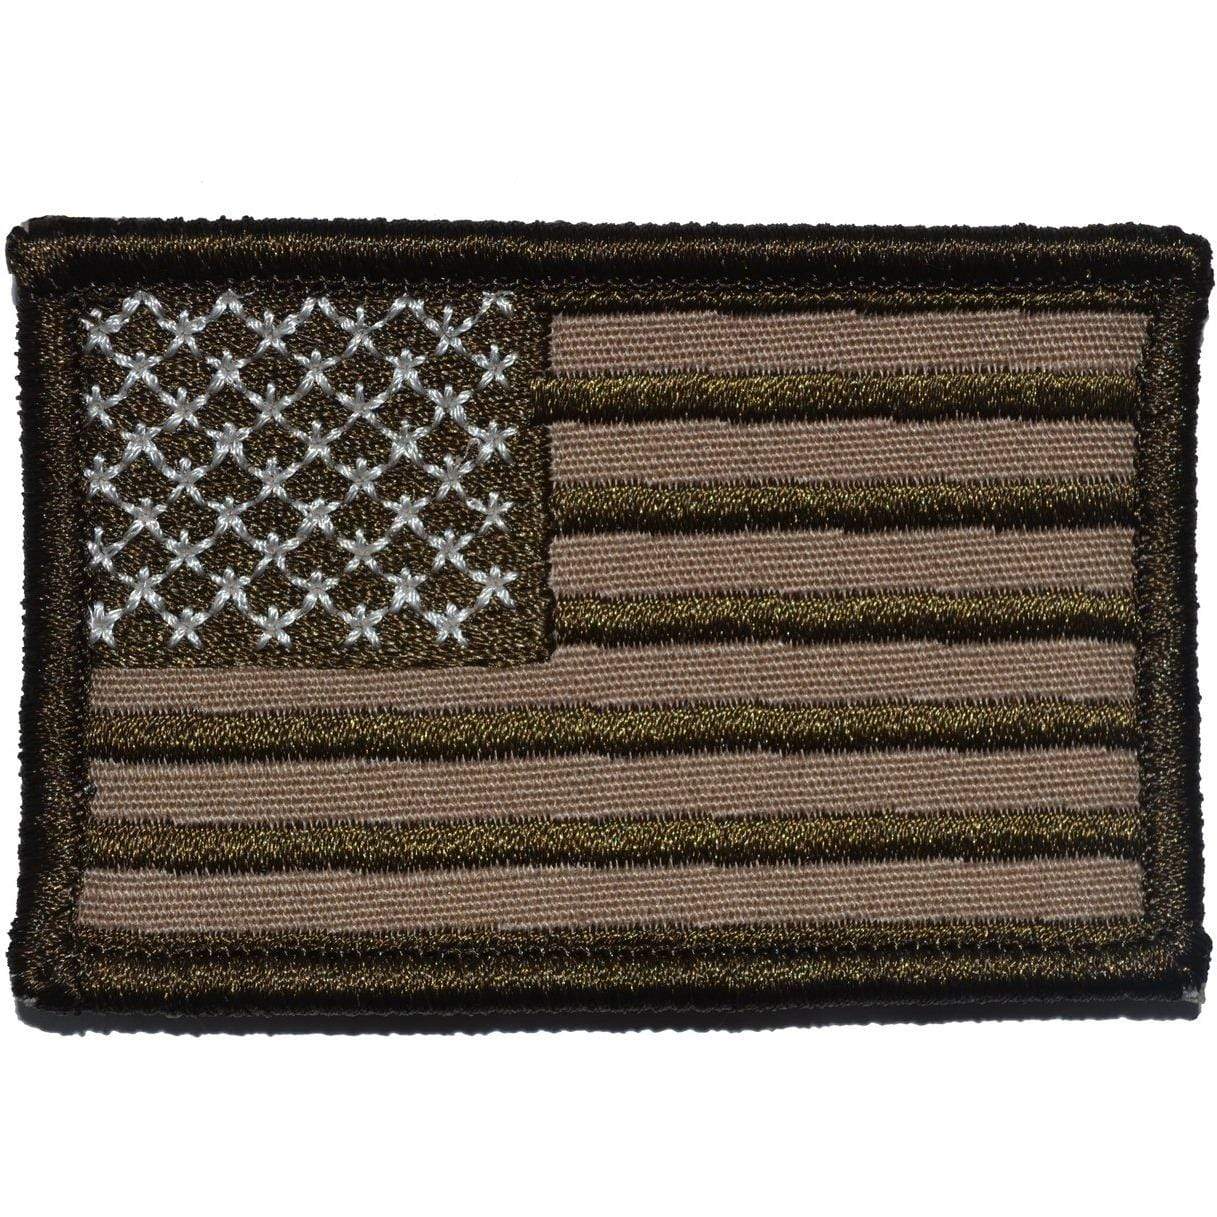 Full Color USA Flag - 2x3 Patch, Left Face (Forward)